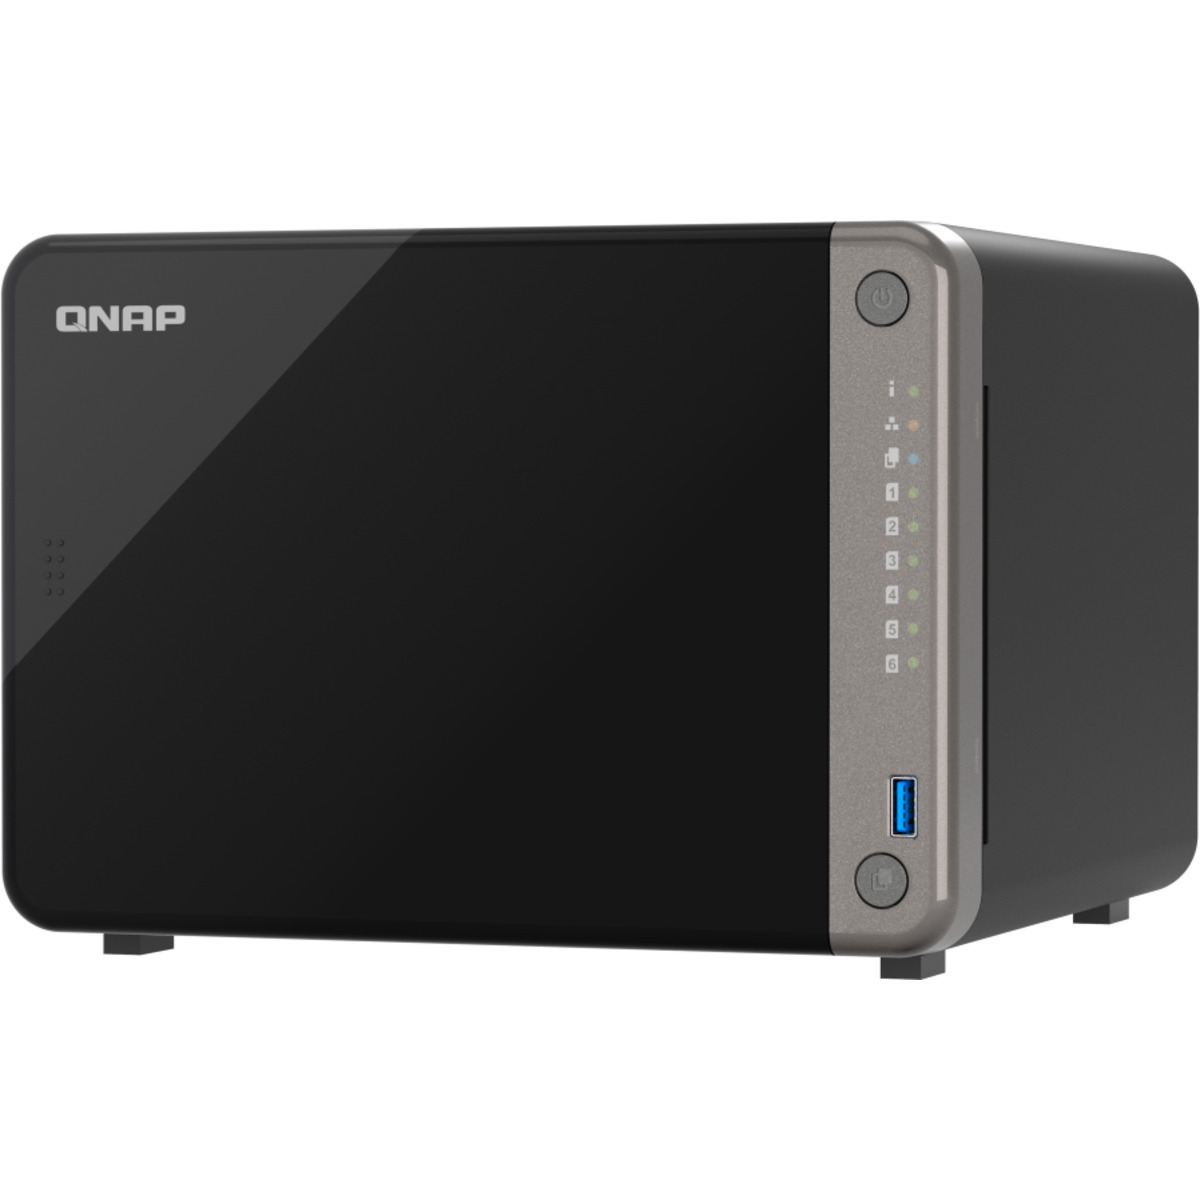 QNAP TS-AI642 6tb 6-Bay Desktop Multimedia / Power User / Business NAS - Network Attached Storage Device 3x2tb Western Digital Red Plus WD20EFZX 3.5 5400rpm SATA 6Gb/s HDD NAS Class Drives Installed - Burn-In Tested TS-AI642